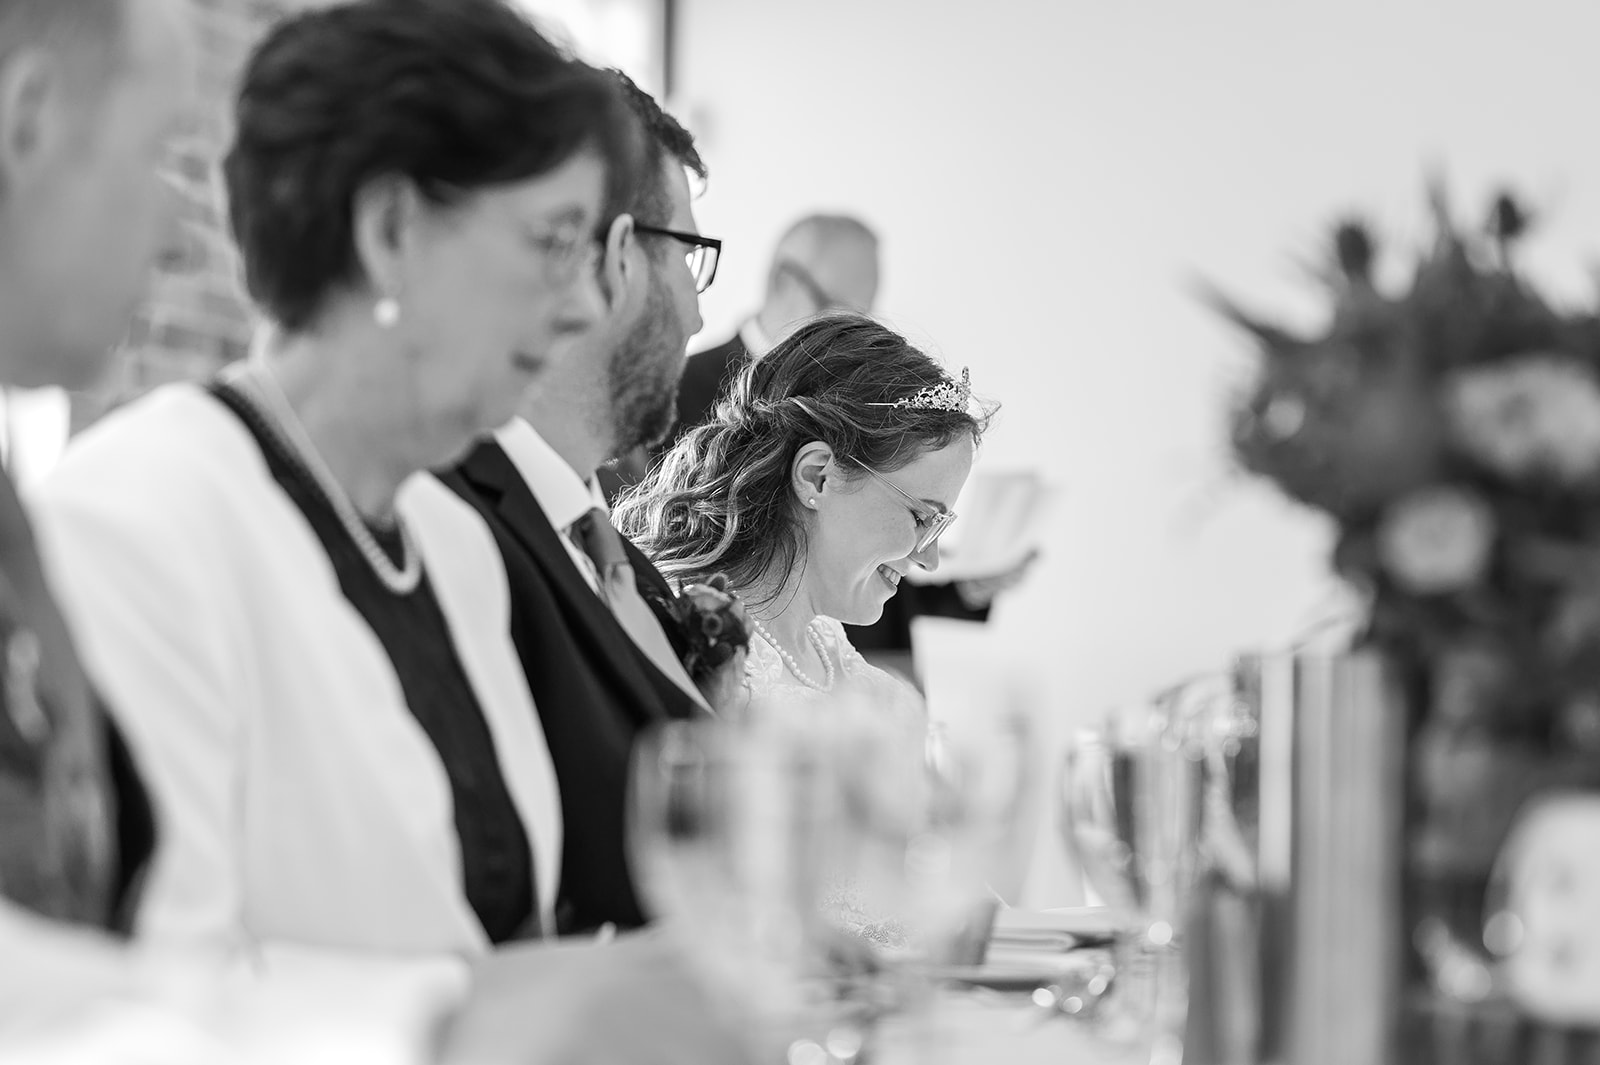 Black and white image of bride at top table